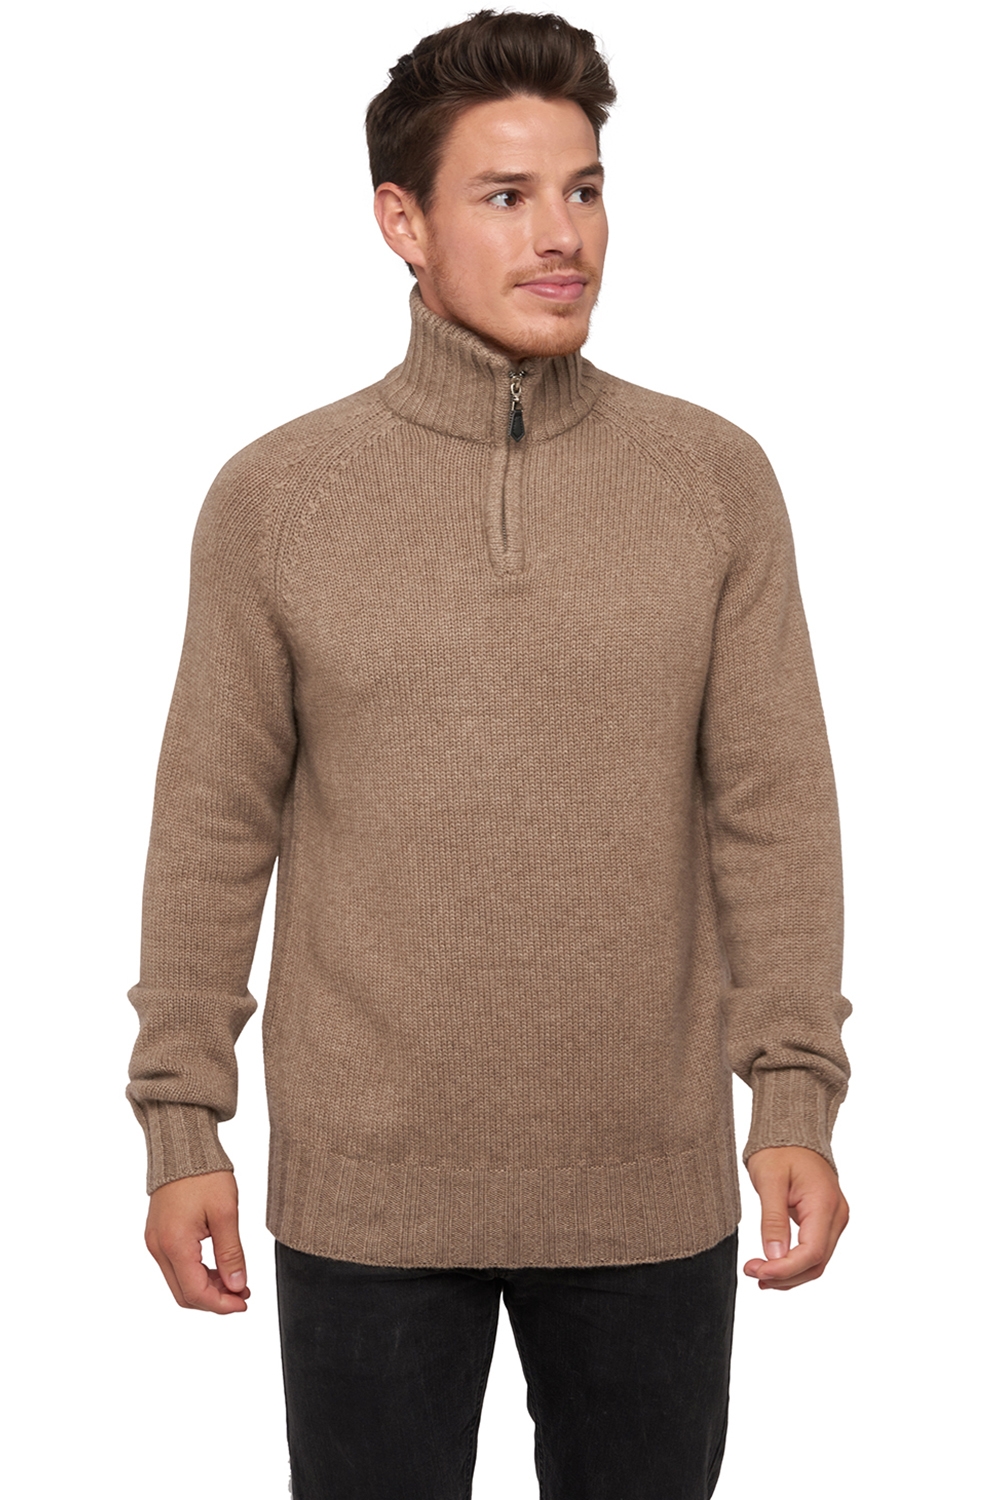 Cachemire Naturel pull homme natural viero natural brown 4xl